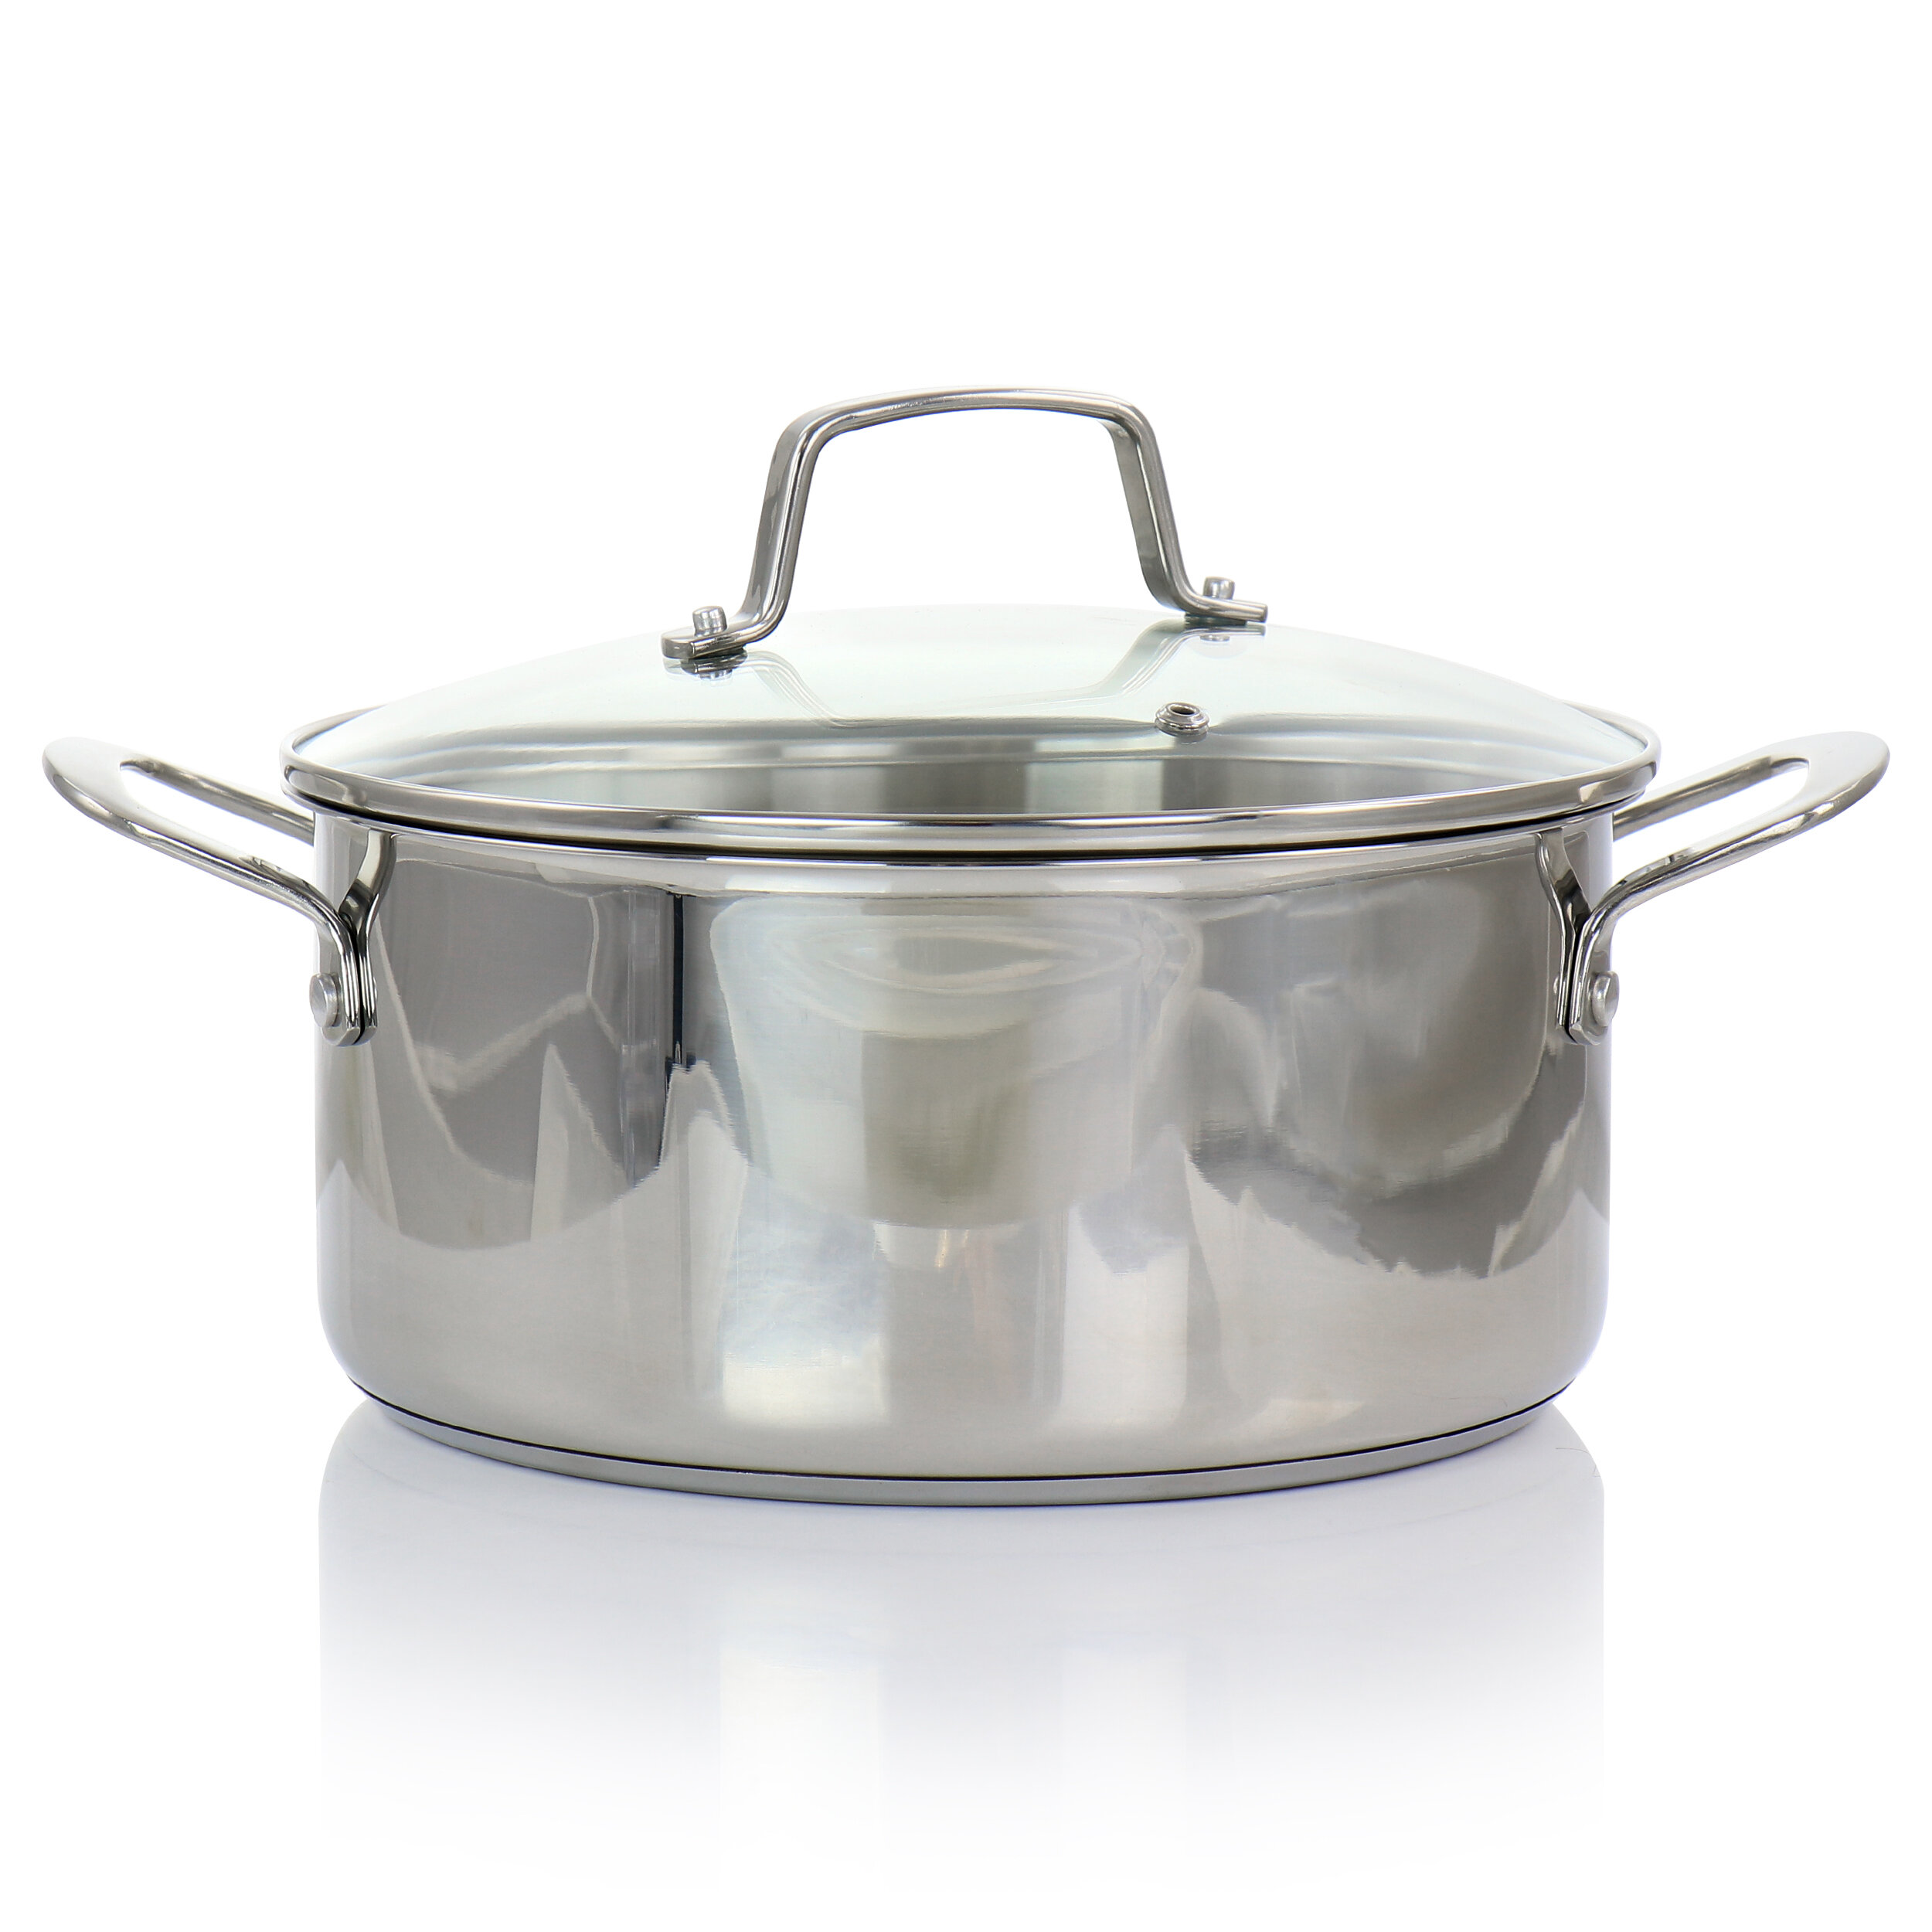 Martha Stewart 5 Quart Stainless Steel Dutch Oven With Vented